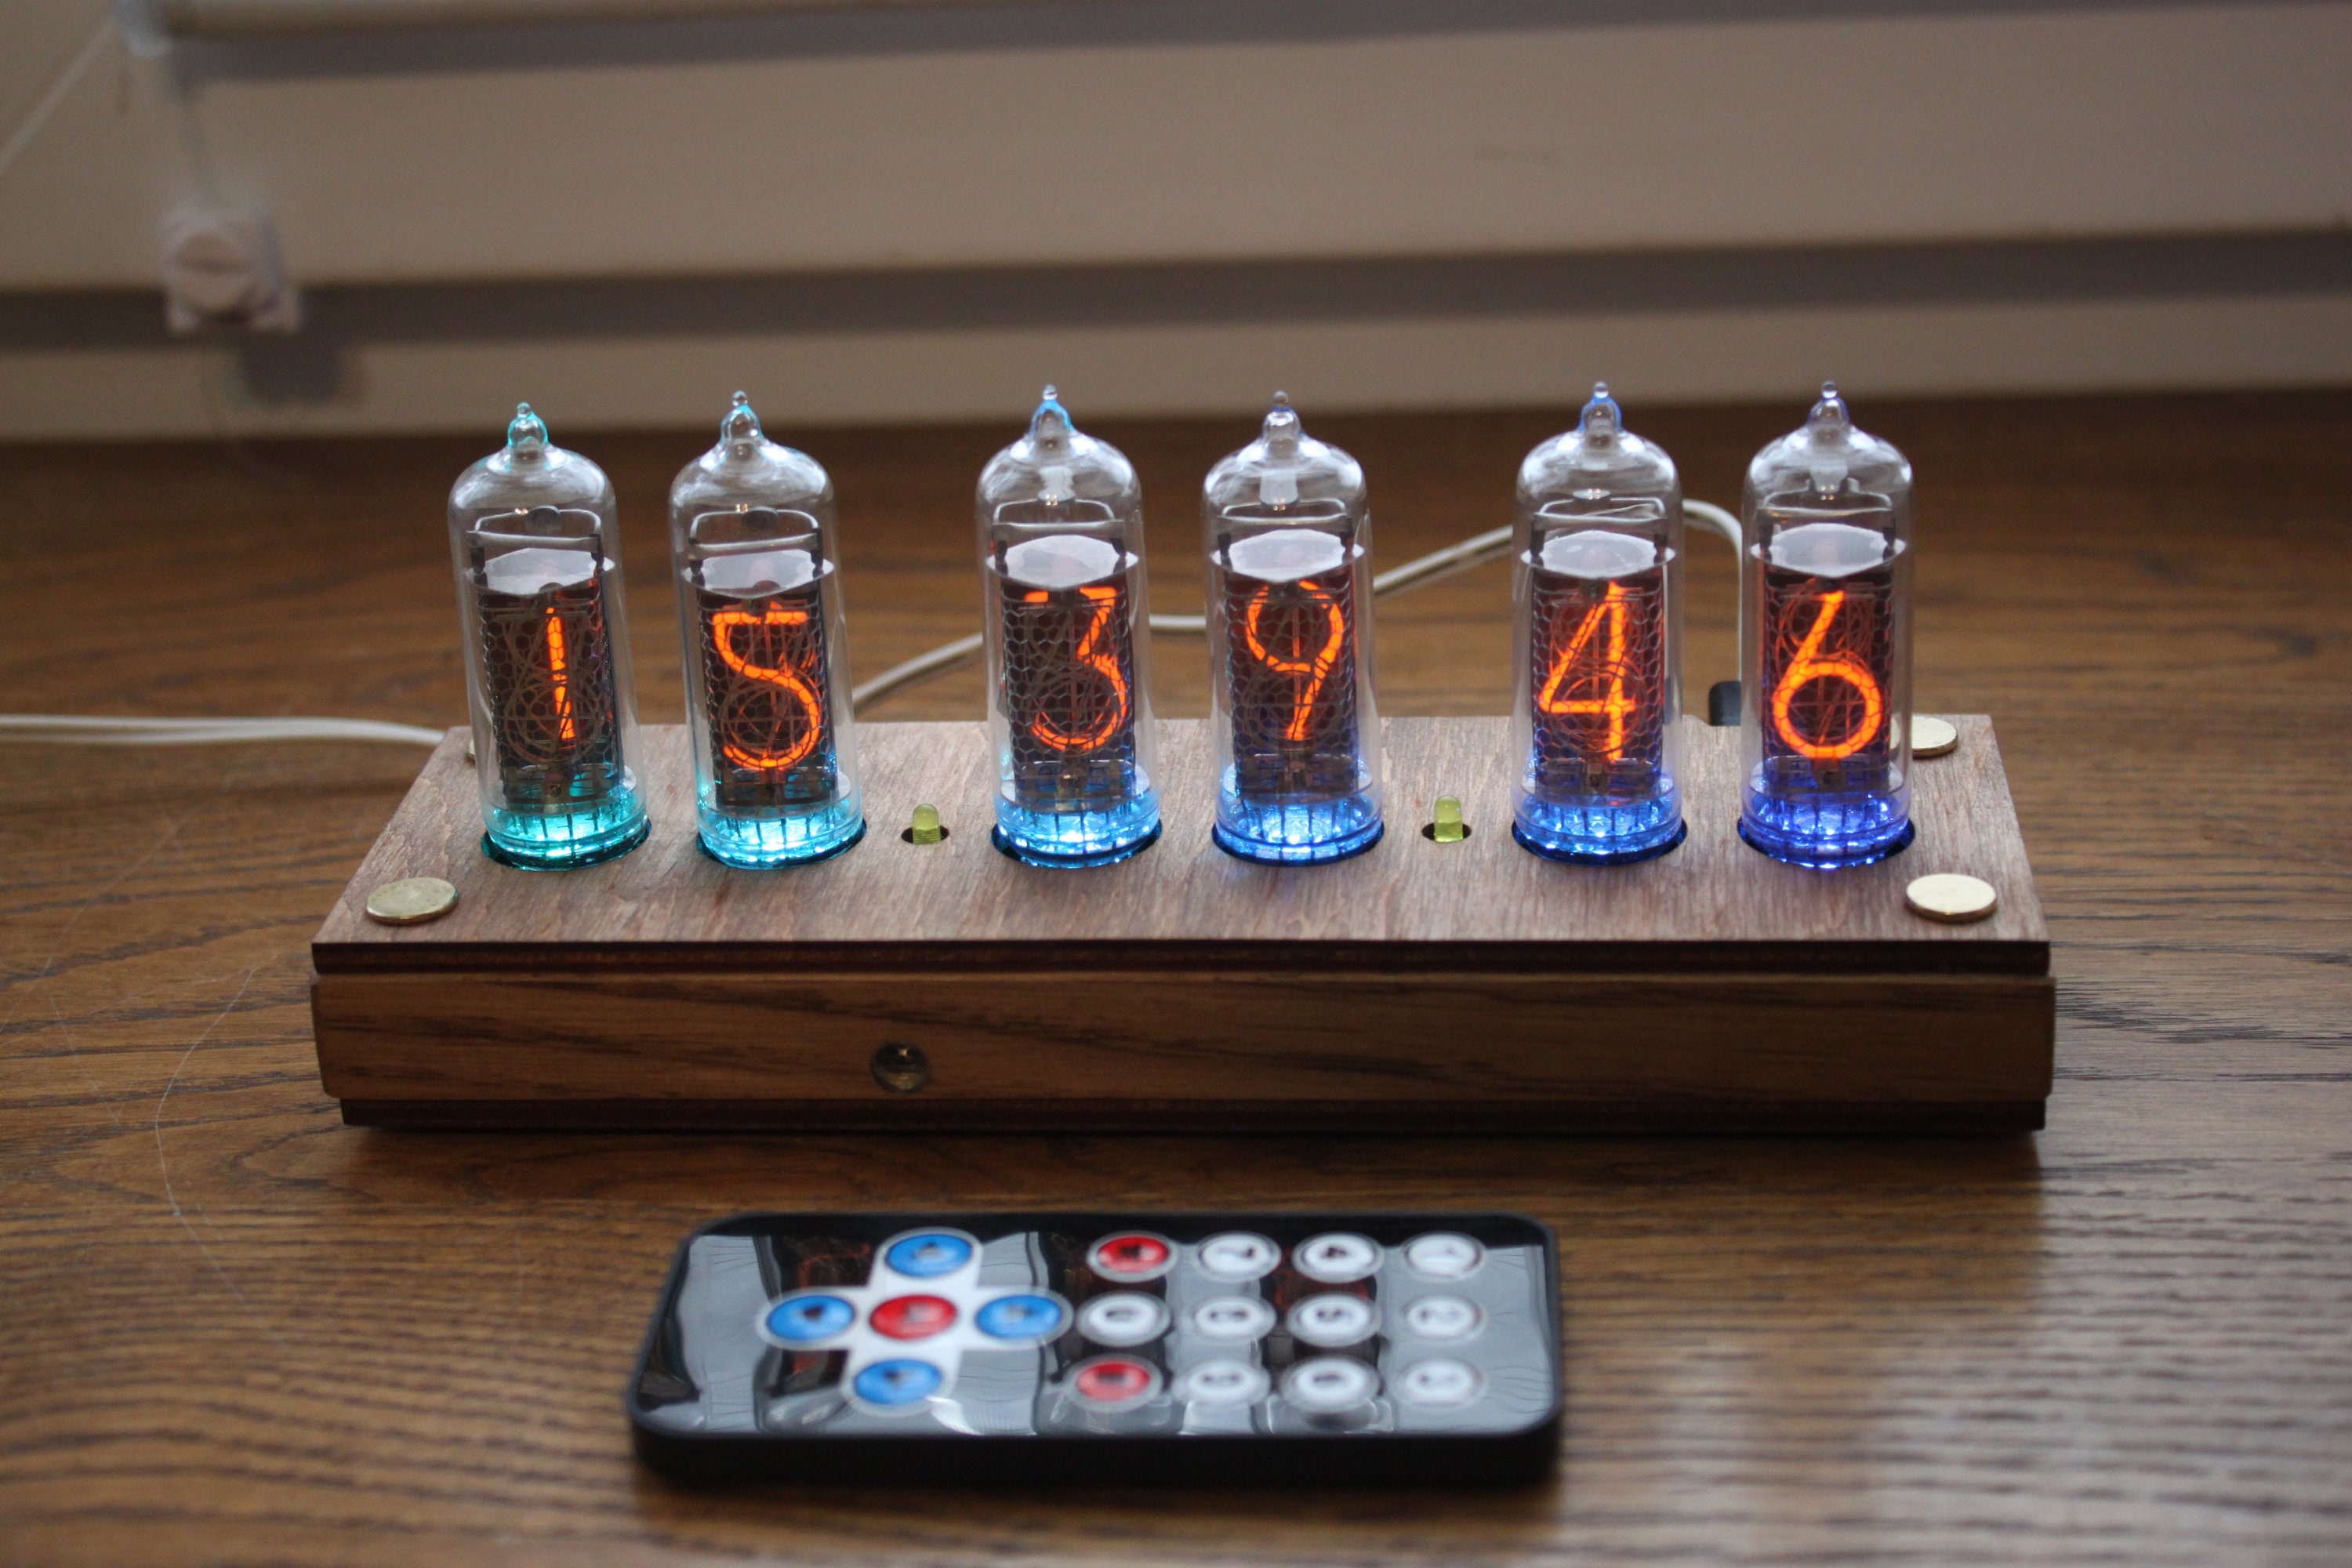 Buy Nixie Tube Clock Include IN-14 Tubes and Enclosure Designer